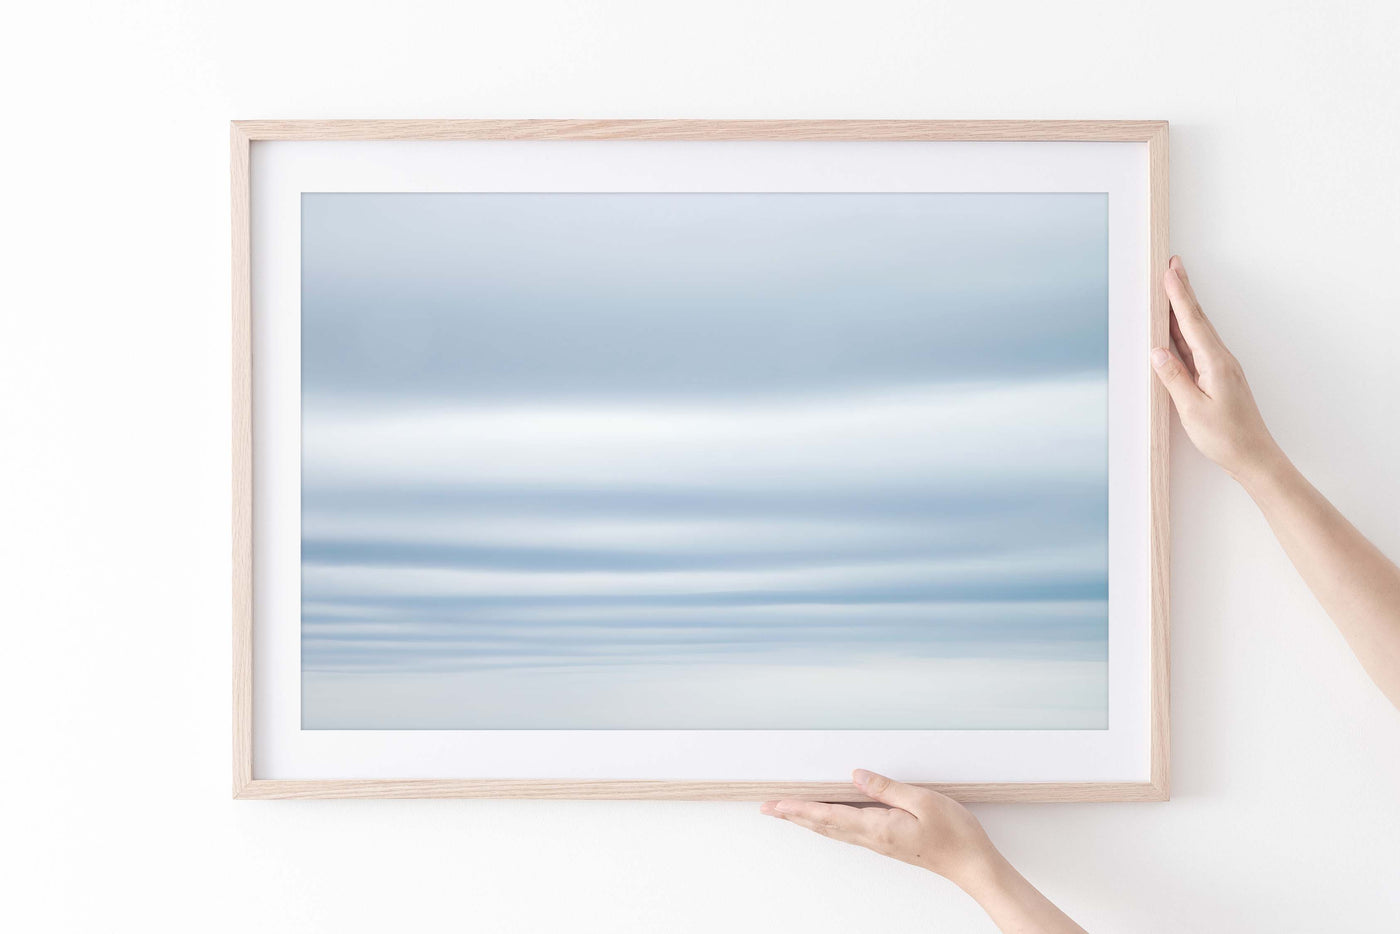 Clouds No 4 - Fine art print by Cattie Coyle Photography in natural wood frame